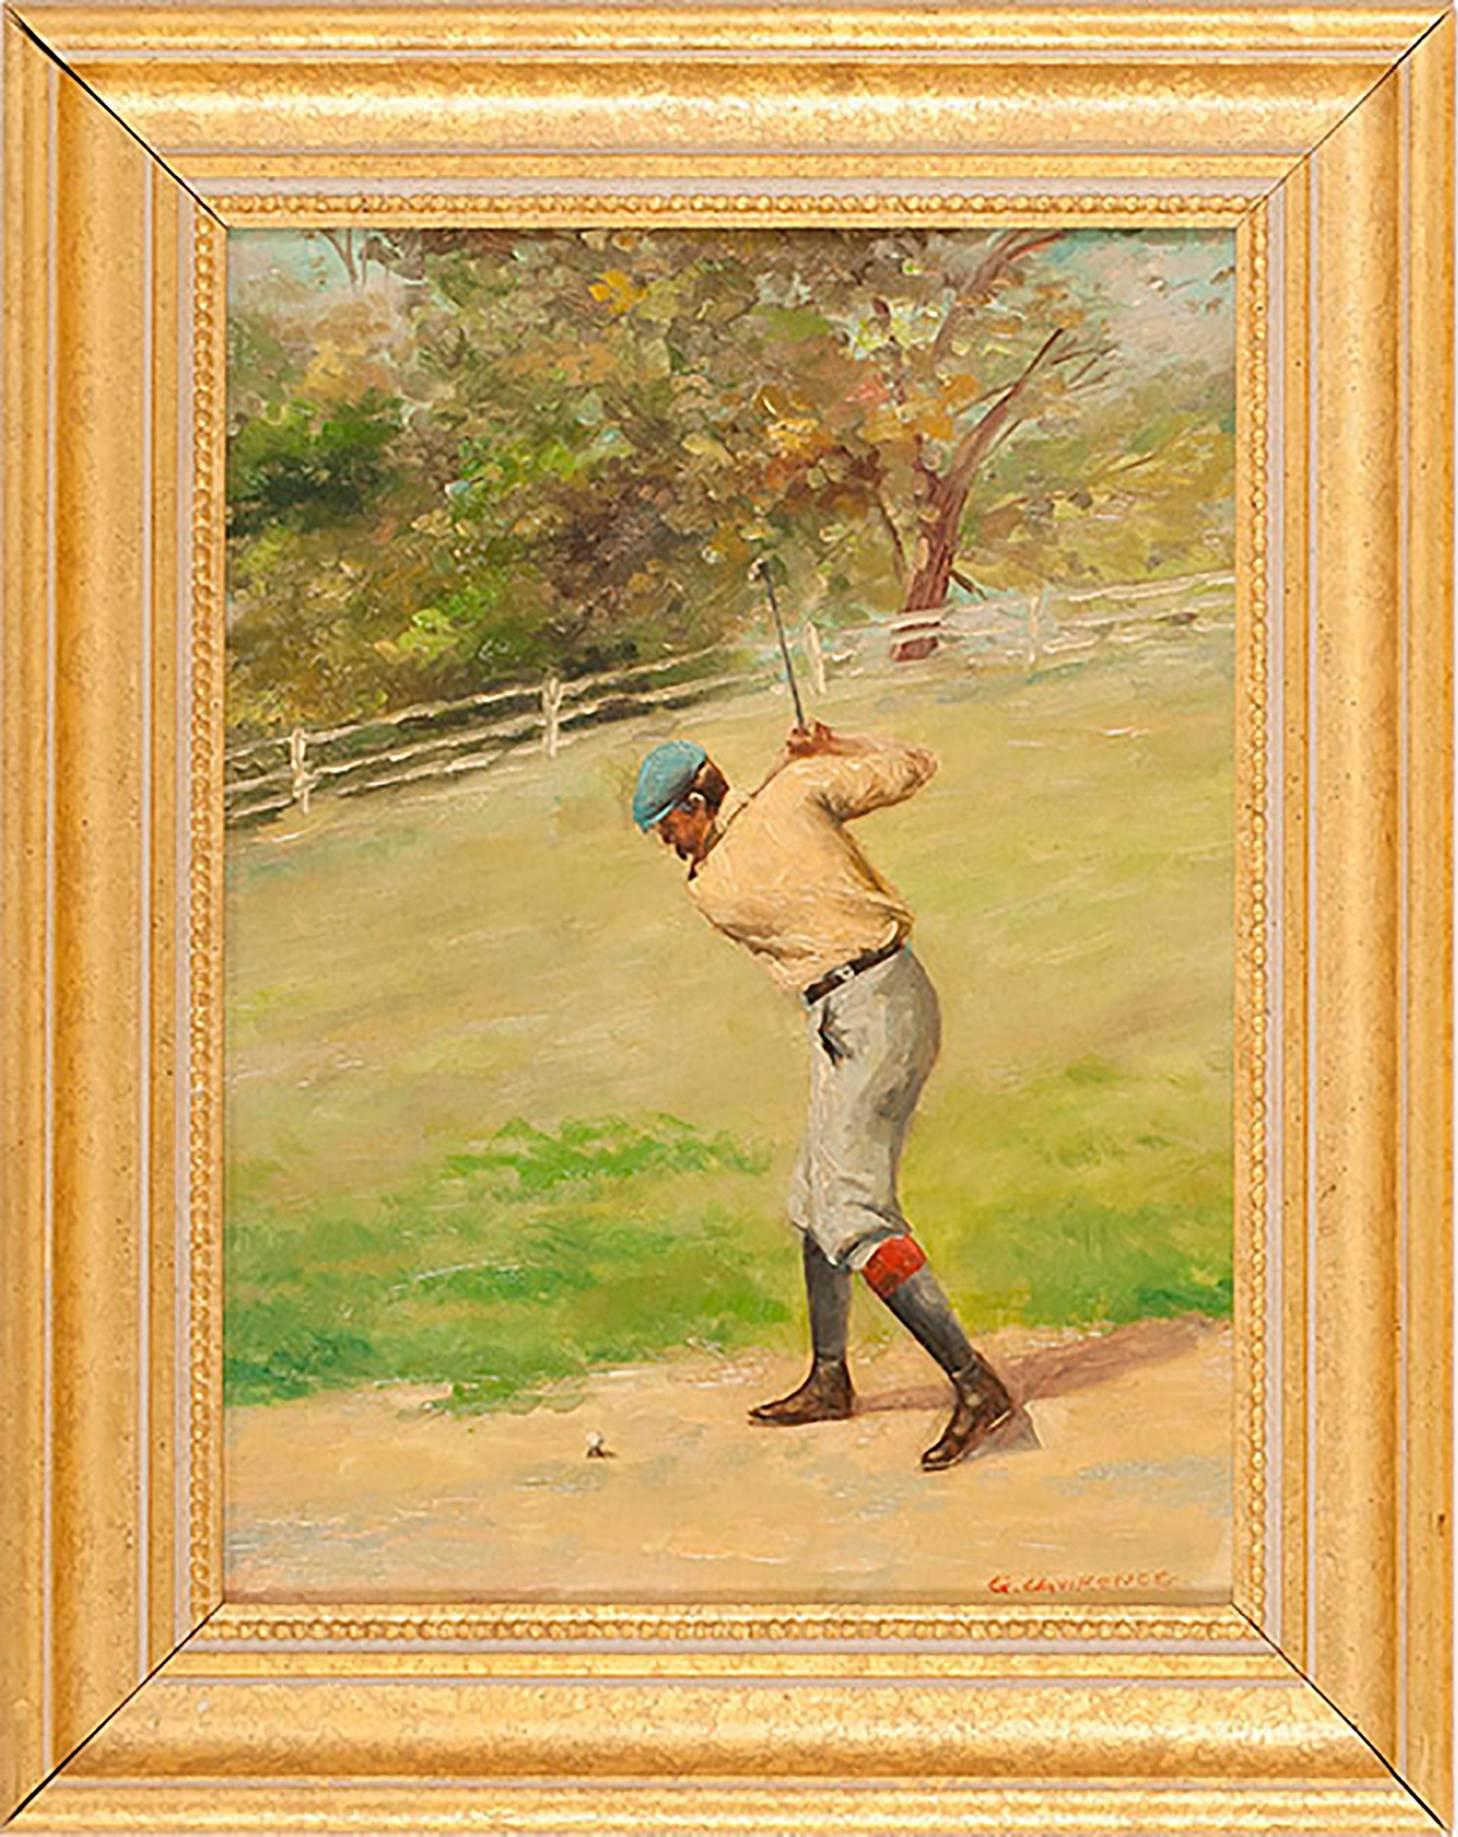 Blue Hatted Golfer - Painting by Unknown